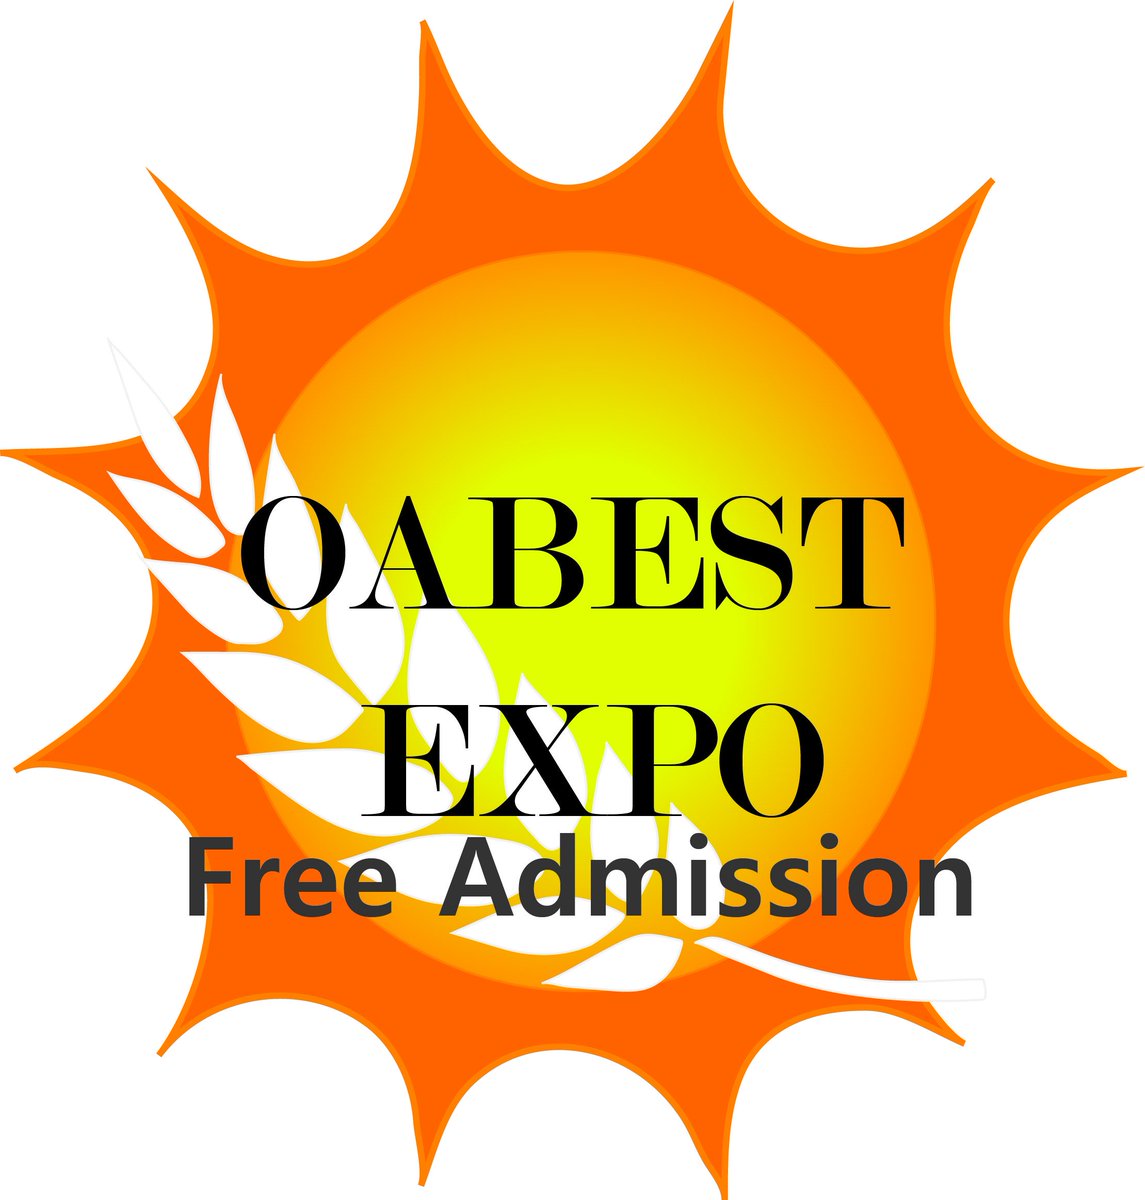 Fifth Annual OABEST Expo - June 3, 2017 9:30 AM-1:30 PM, OASHS @OABESTEXPO #agriculture #business #enviornmentalscience #technology